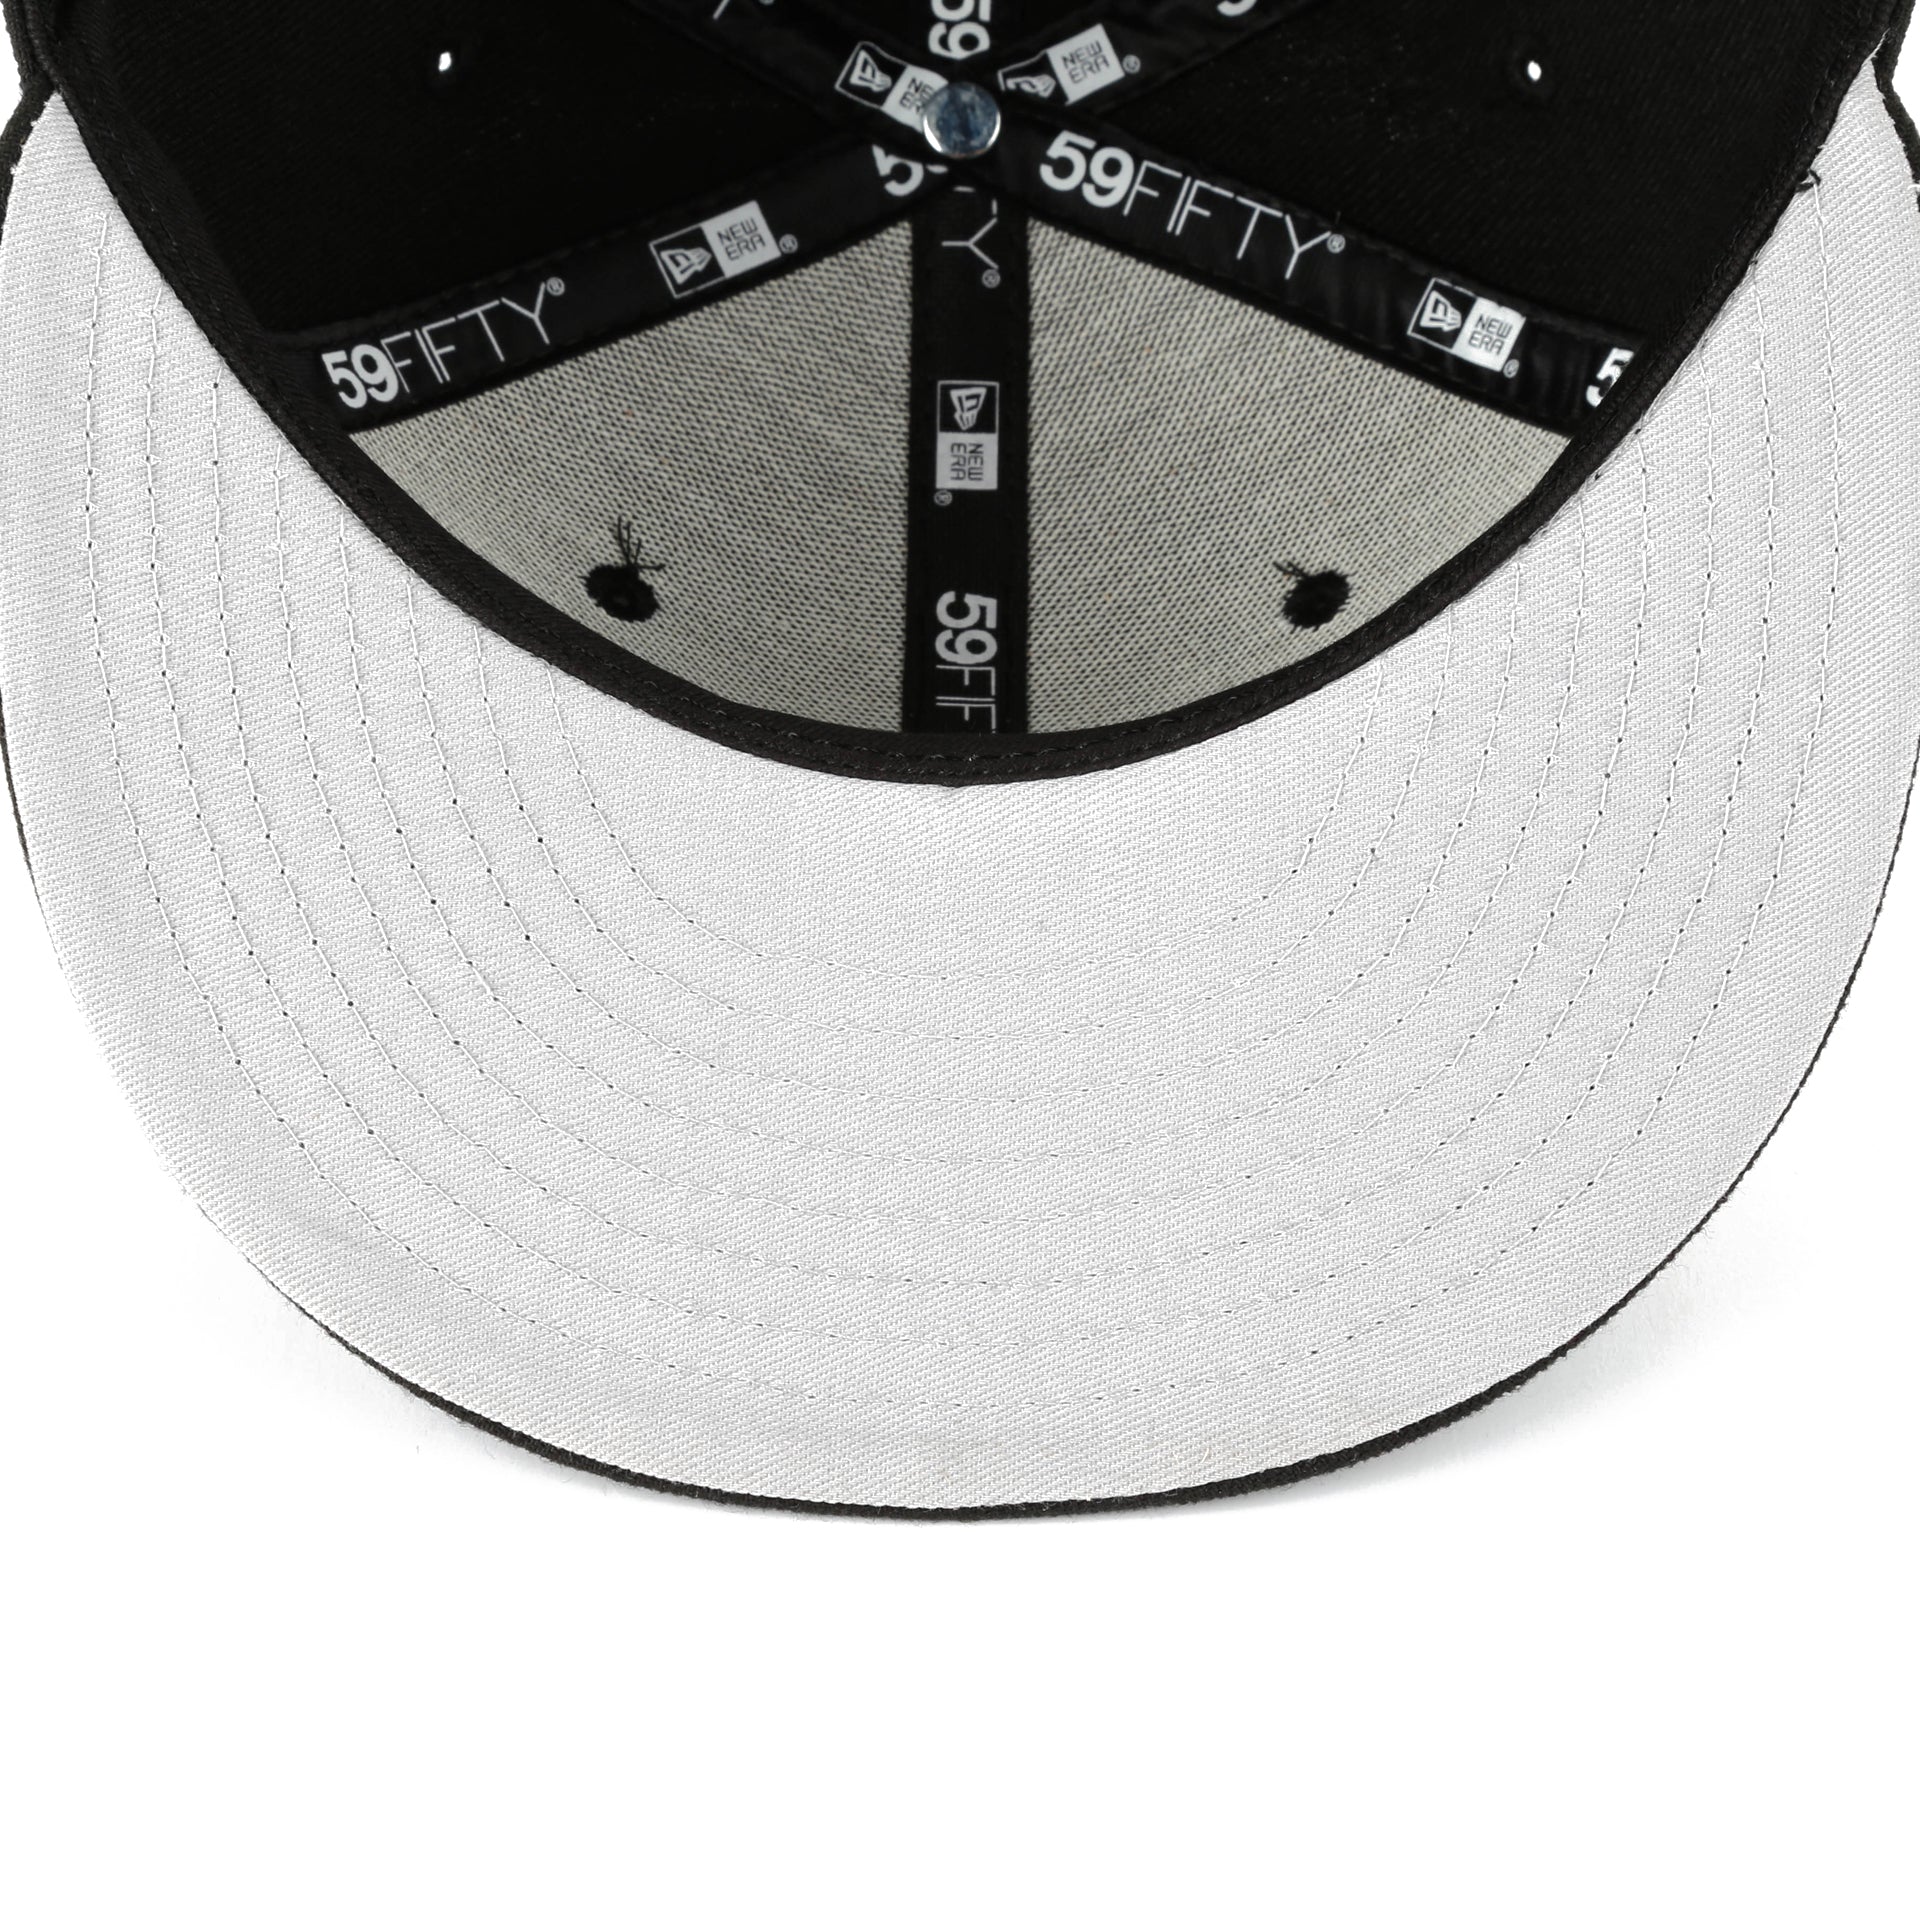 New Era 59Fifty League Basic Fitted Cap - New York Yankees/Black